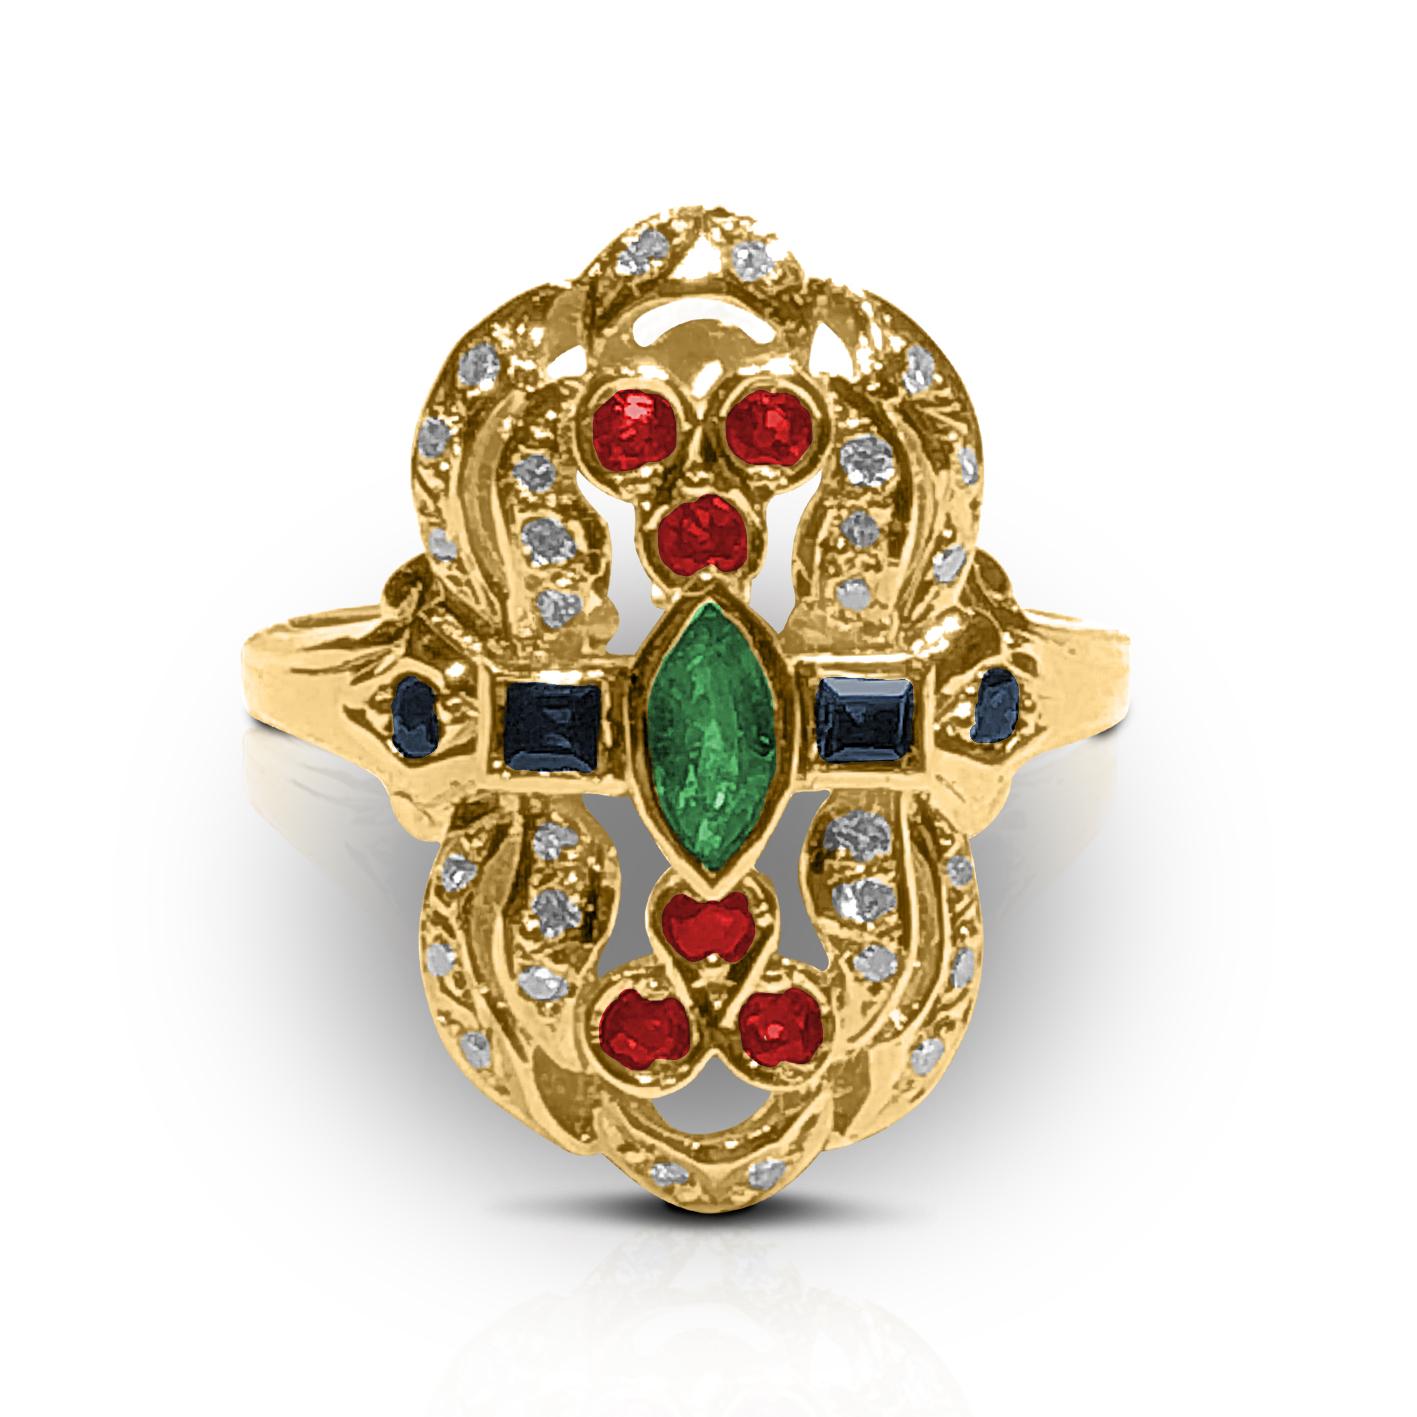 S.Georgios Hand Made 18 Karat Yellow Gold Ring decorated with Byzantine-era style granulation and a combination of Diamonds, Rubies, Emerald, and Sapphires.
The stunning ring features Brilliant cut Diamonds with a total weight of 0.22 Carat, and